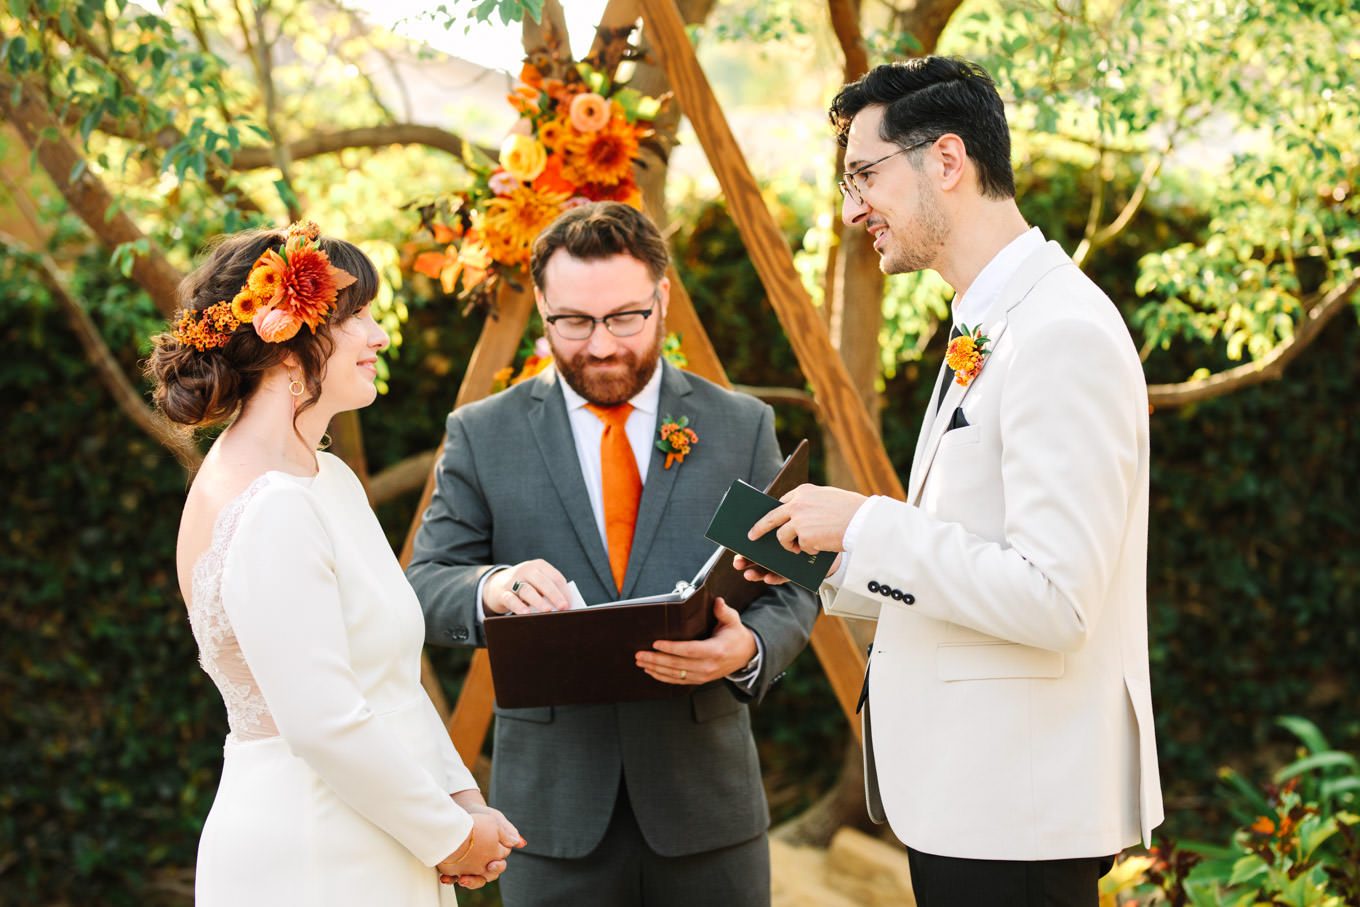 Groom and bride while reading vows | Vibrant backyard micro wedding featured on Green Wedding Shoes | Colorful LA wedding photography | #losangeleswedding #backyardwedding #microwedding #laweddingphotographer Source: Mary Costa Photography | Los Angeles